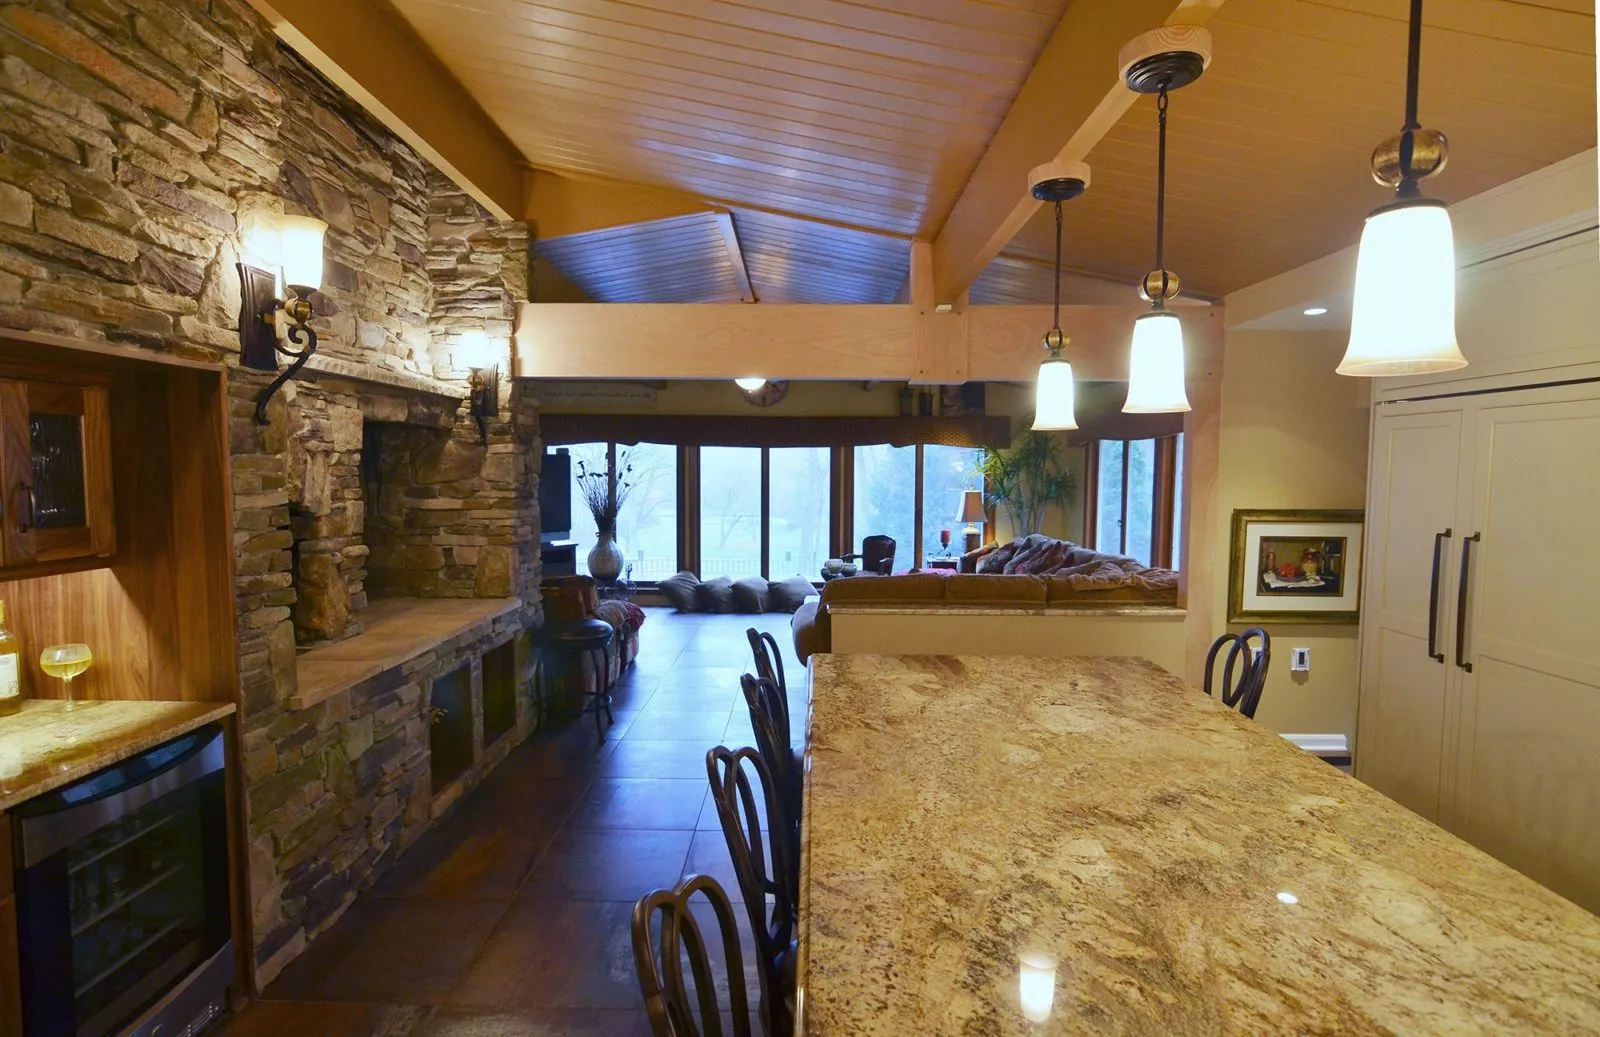 Kitchen with appliances, kitchen table with chairs, stonework wall with stone oven, and living room